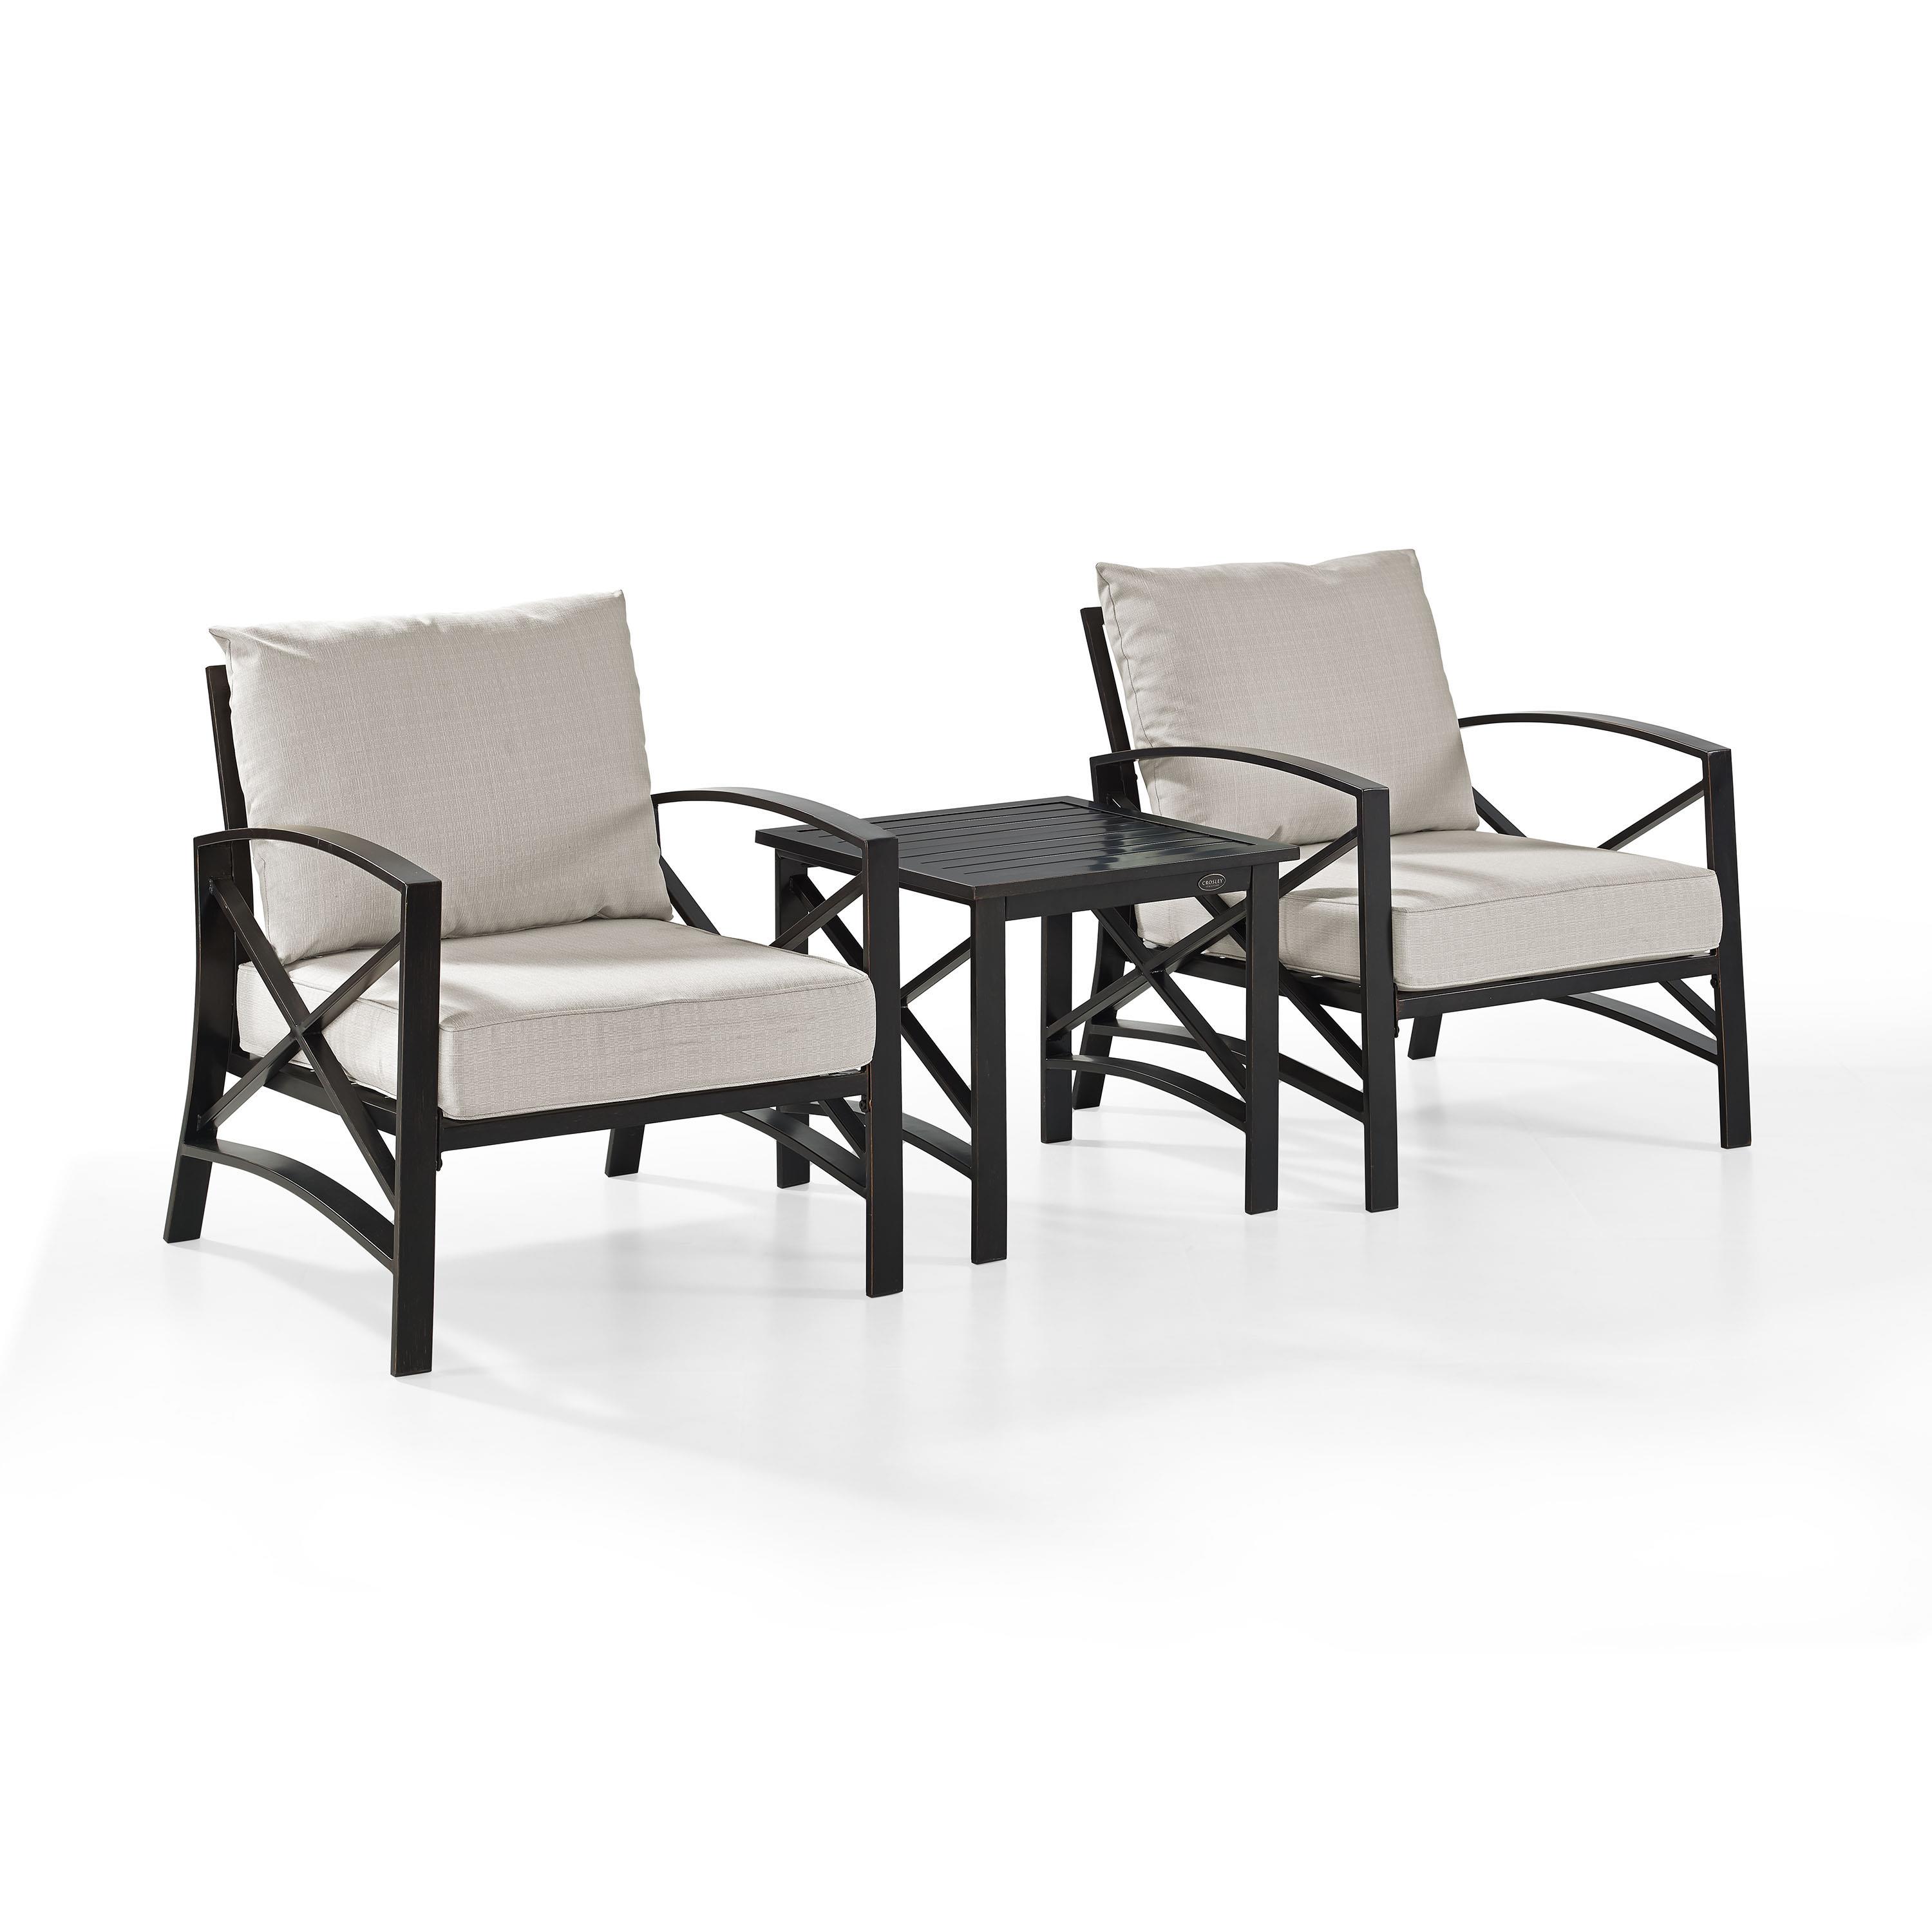 Crosley Furniture Kaplan 3 Pc Outdoor Seating Set With Oatmeal Cushion - Two Chairs, Side Table - image 4 of 8